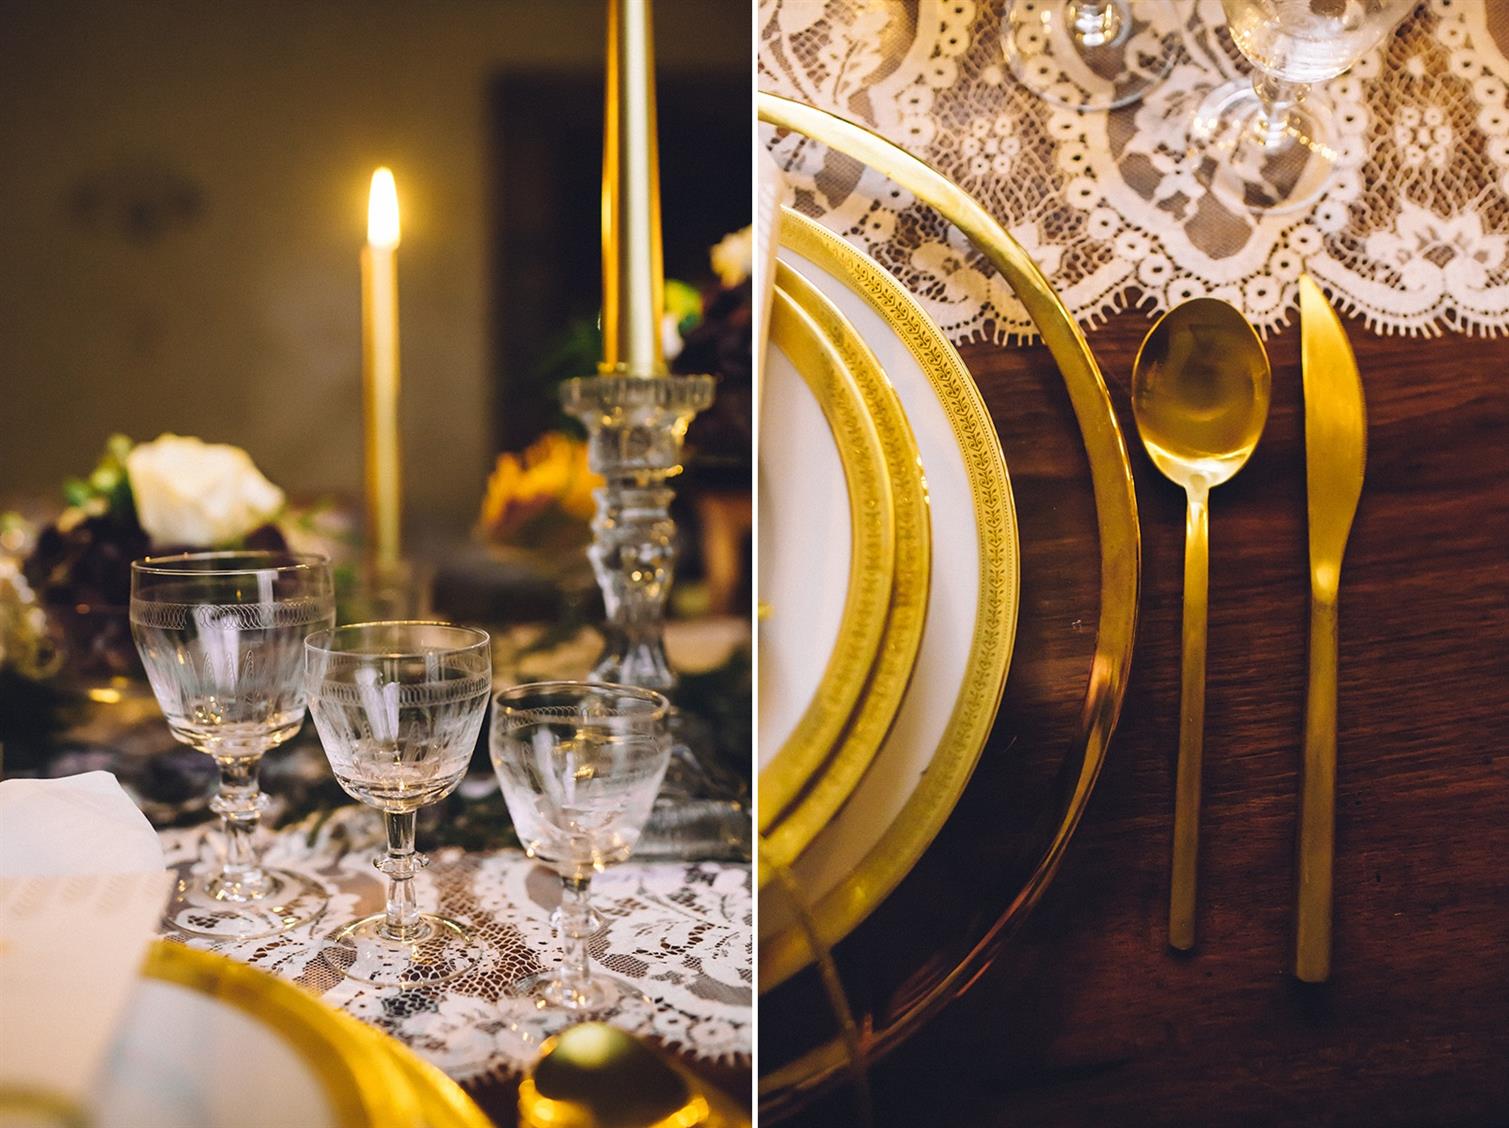 A Beguiling Winter Wedding Inspiration Shoot Dripping with Deco Decadence